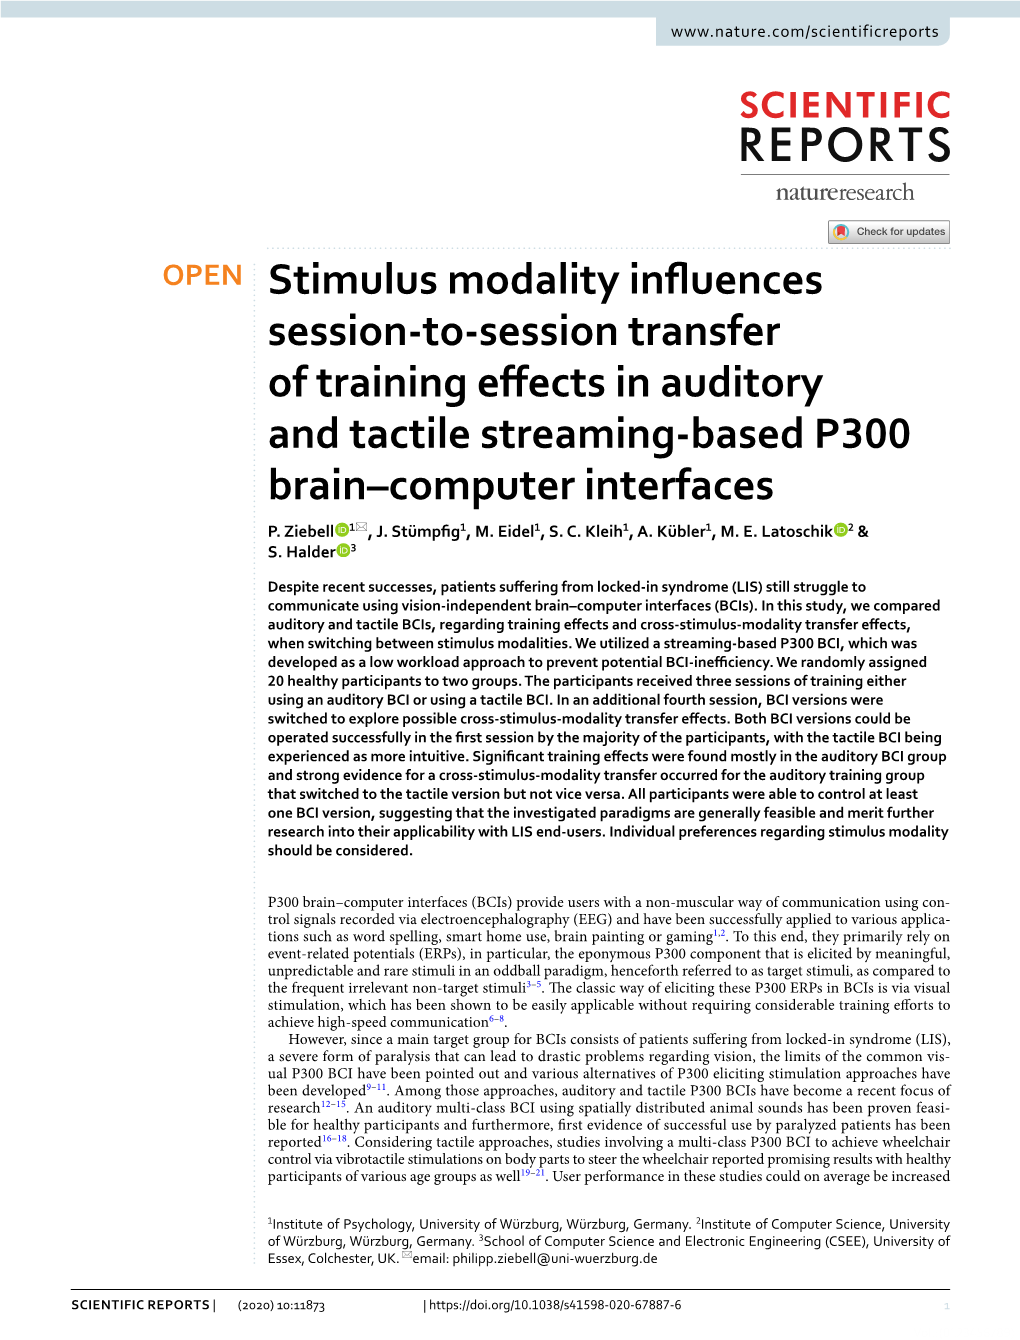 Stimulus Modality Influences Session-To-Session Transfer Of